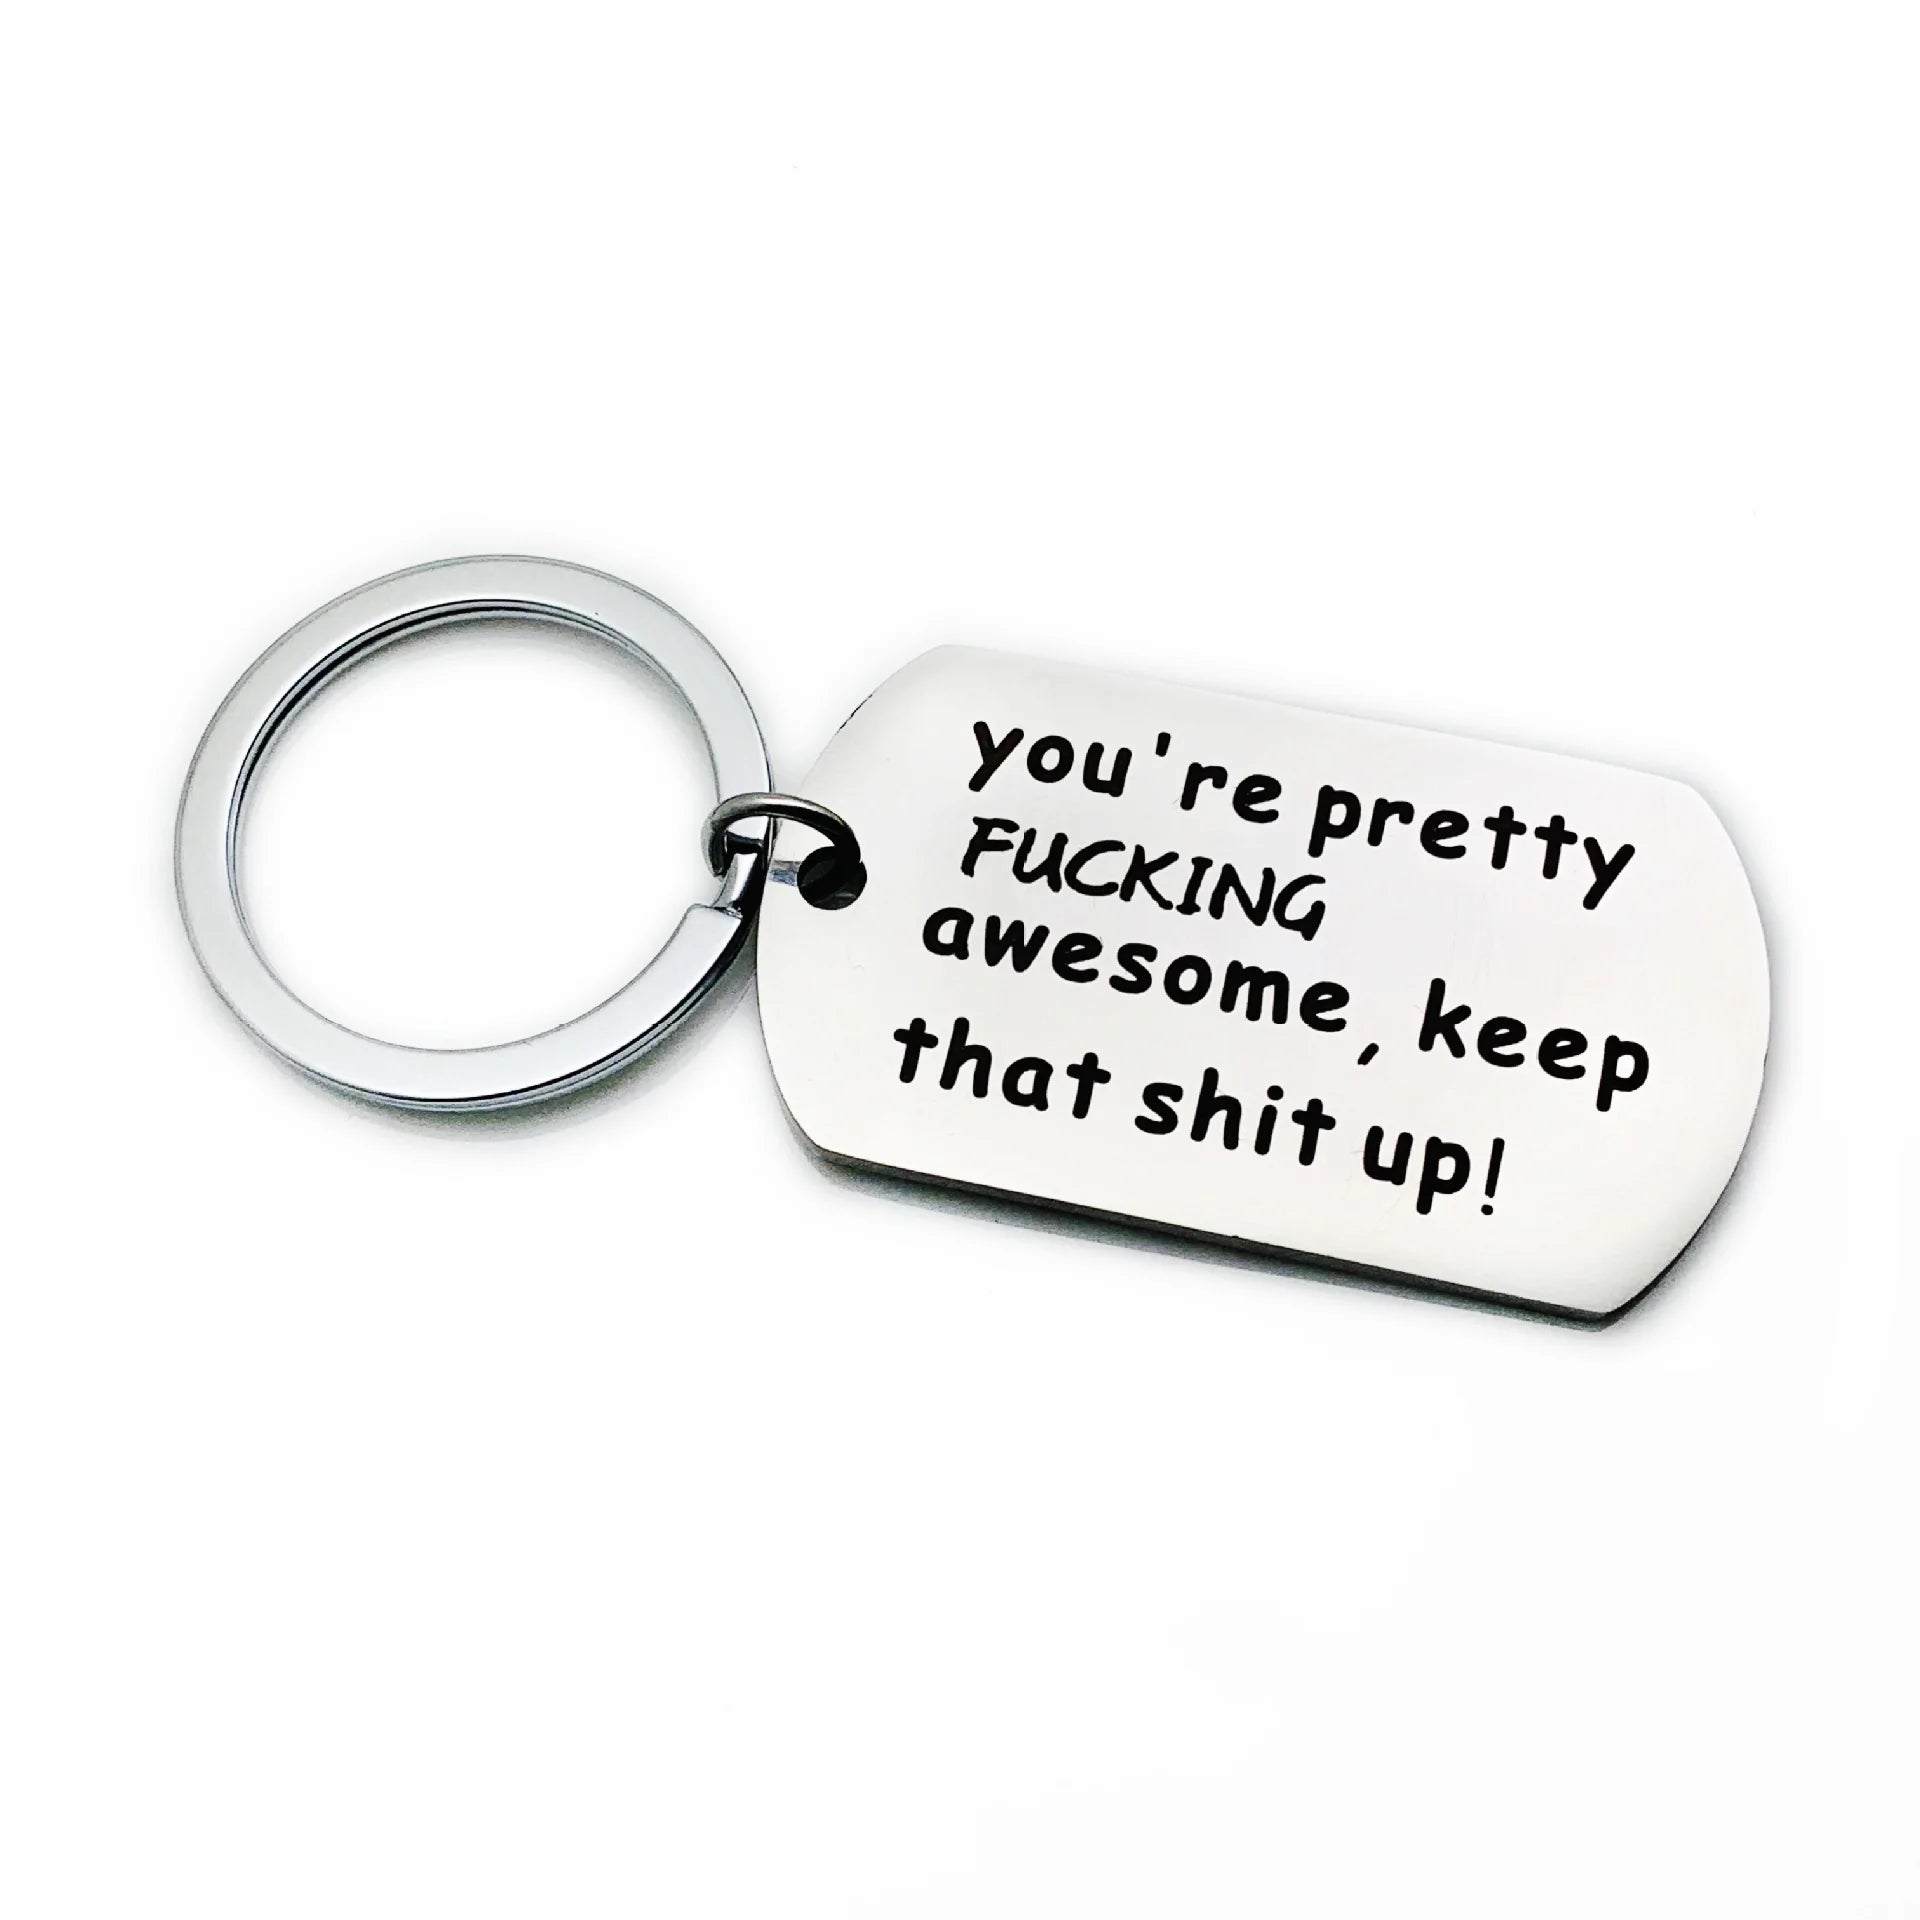 You're Pretty Fucking Awesome Keep That Shit Up Keychain